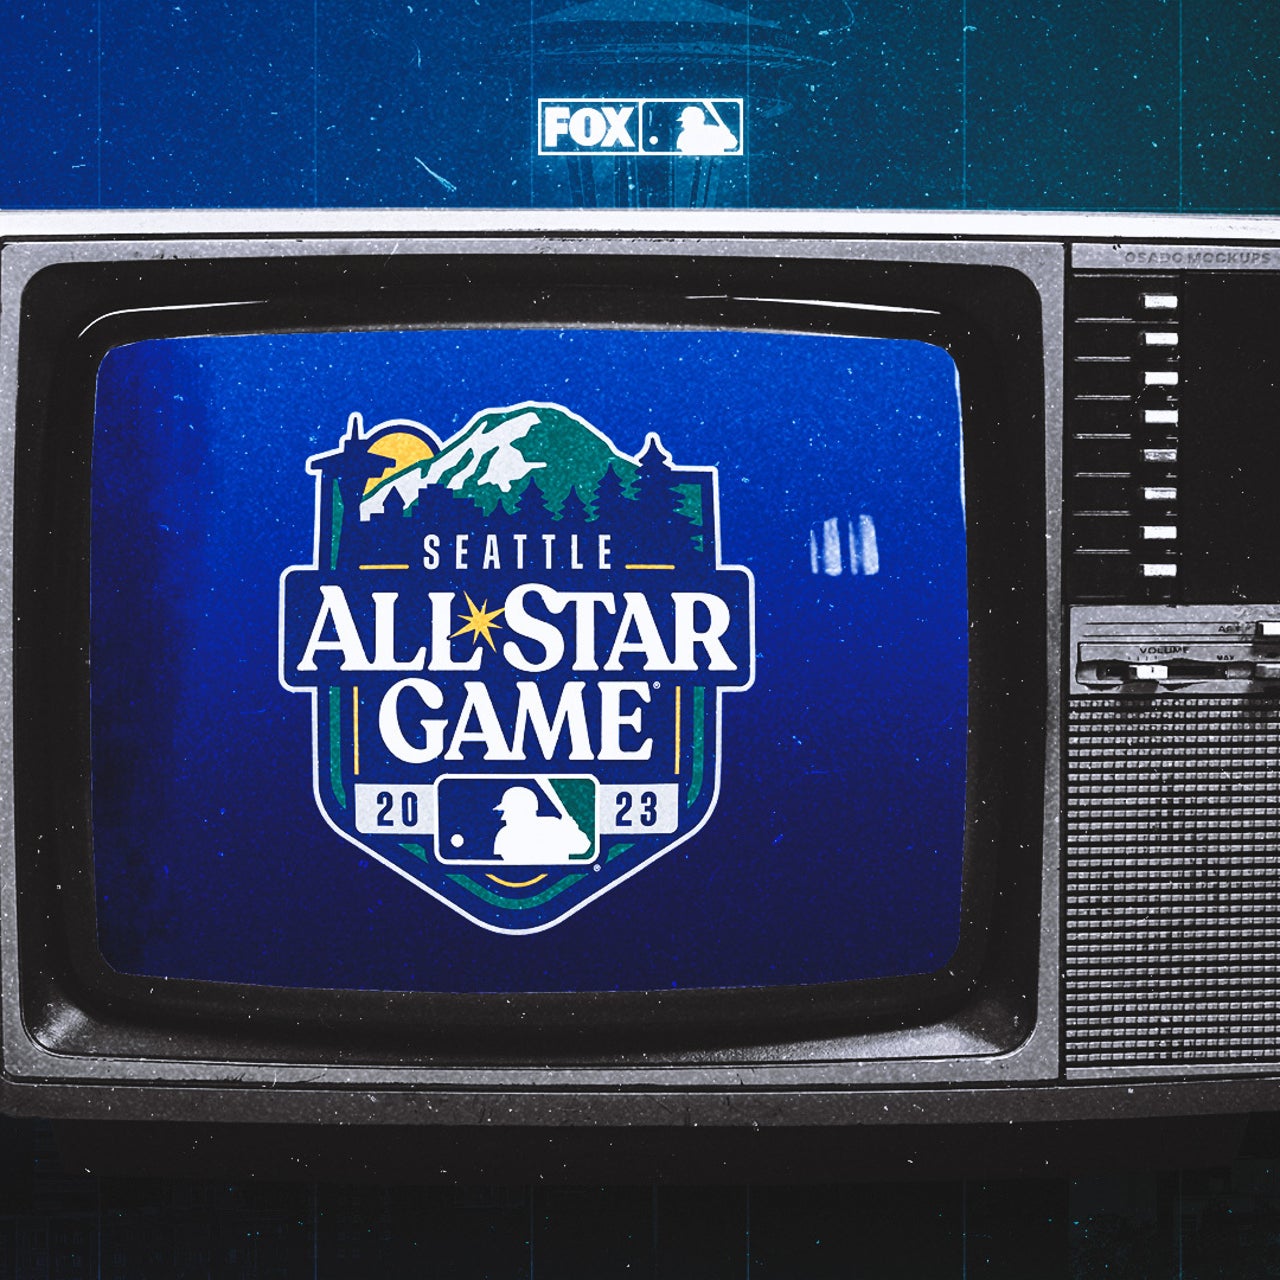 MLB All-Star Week 2023 on SiriusXM to Include Live Play-By-Play and Specials